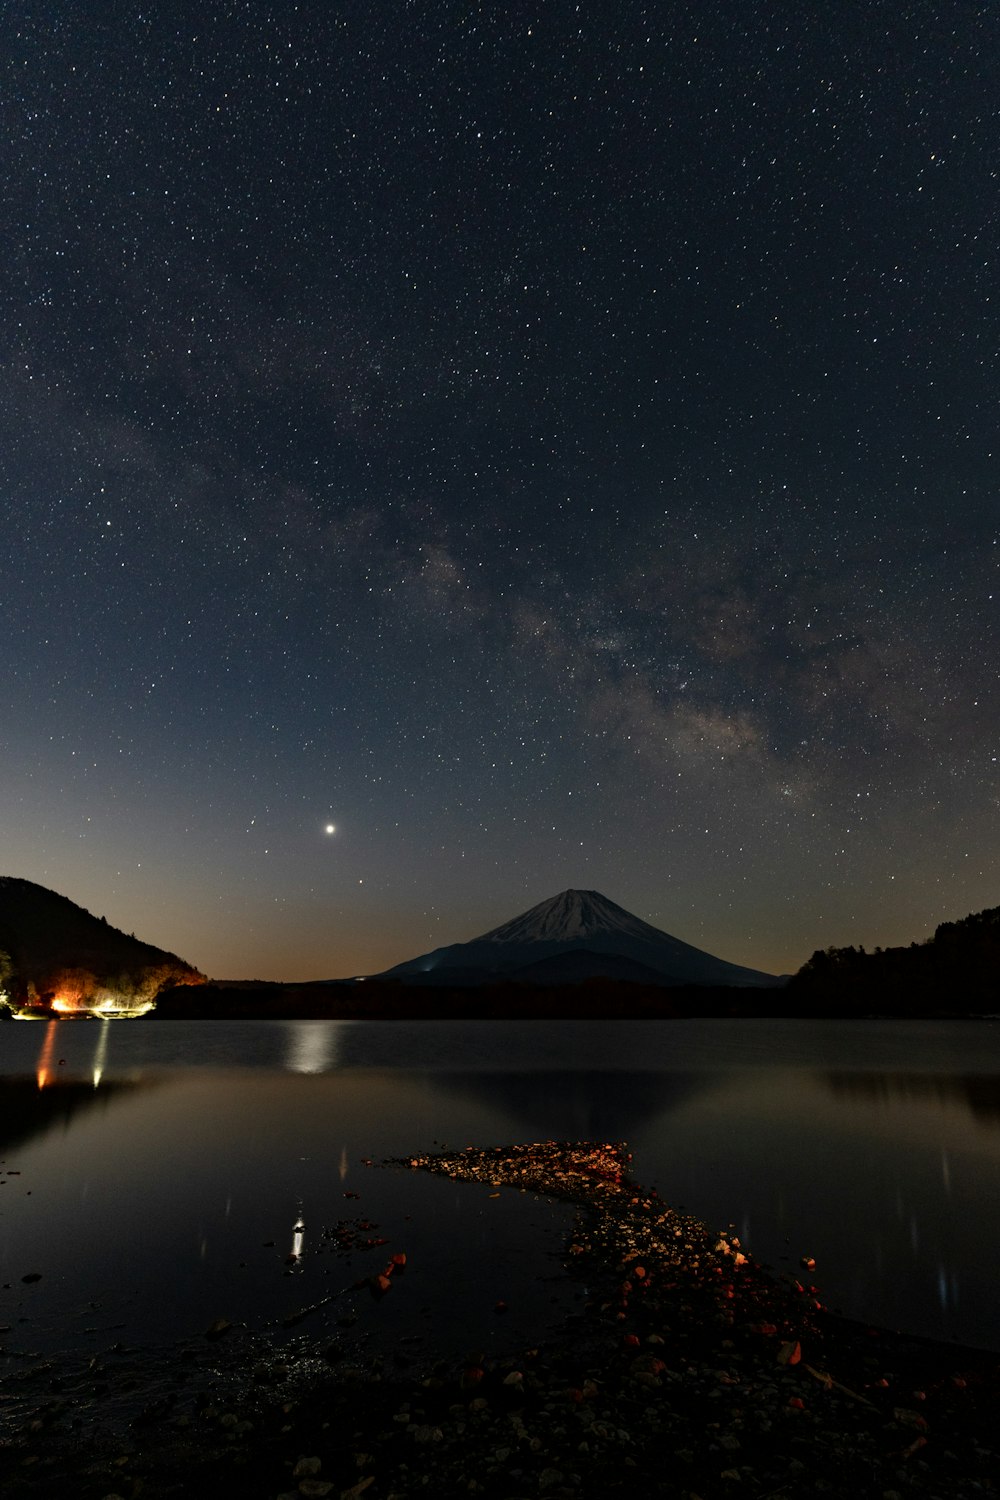 the night sky over a lake with a mountain in the background